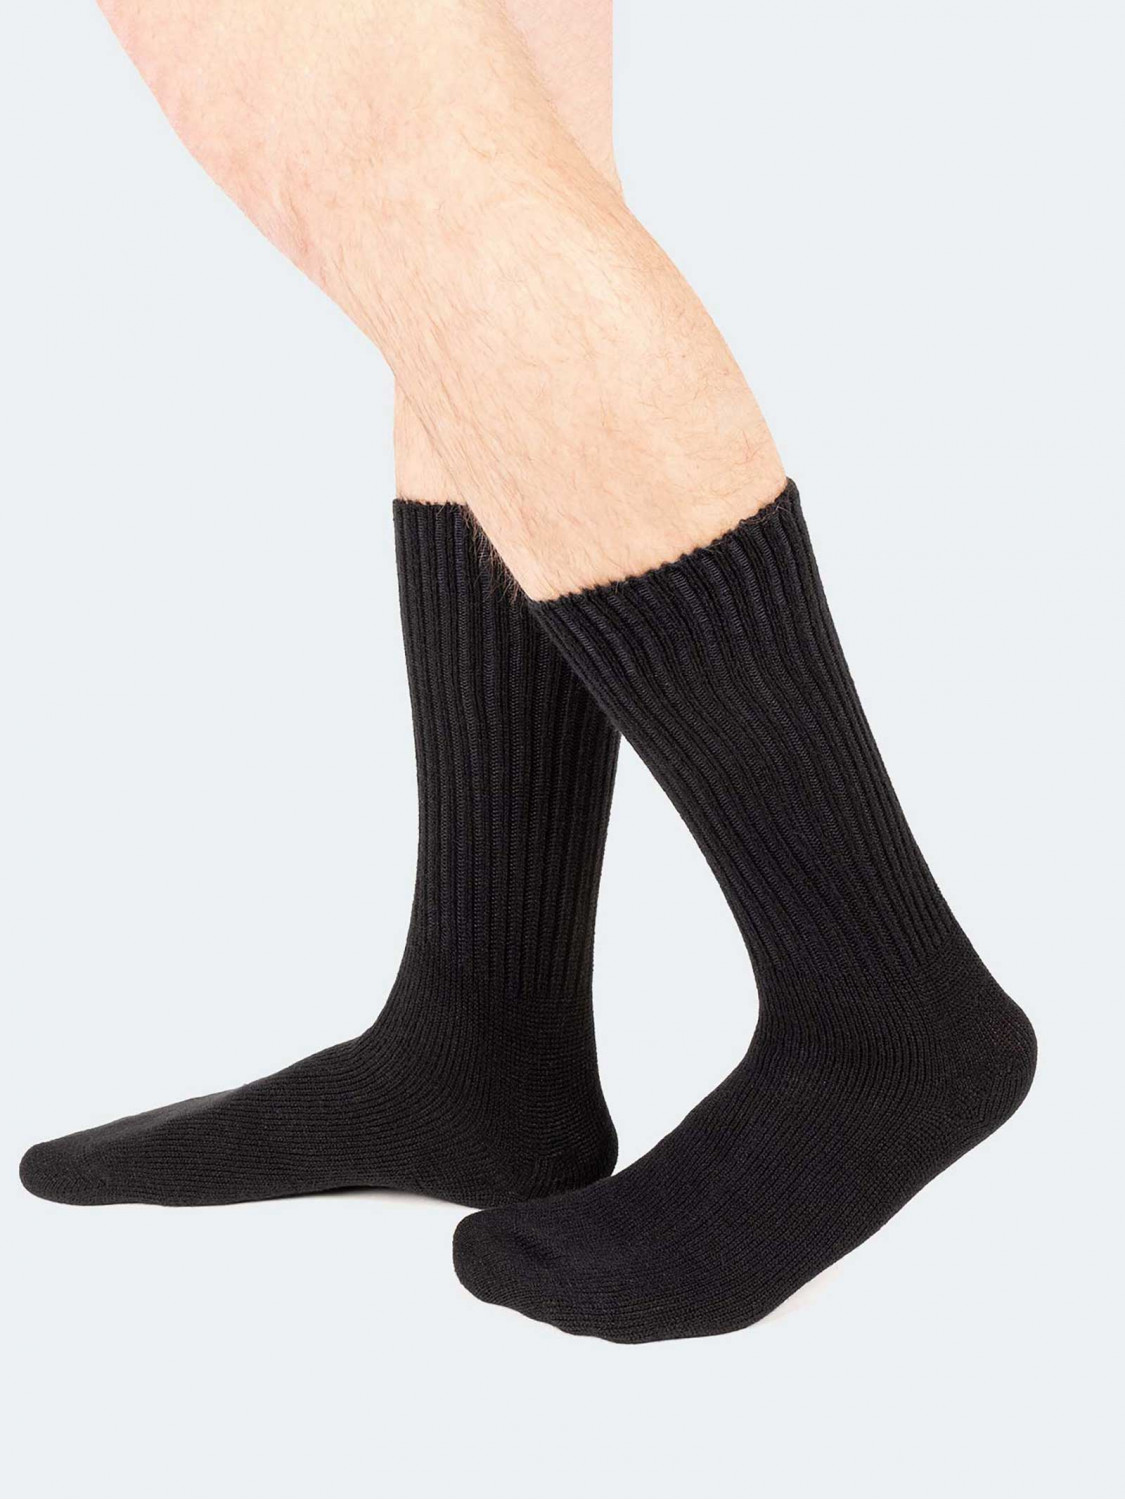 feel option Maxim Men's Soft Short Stockings Ribbed Without Elastic Cuff